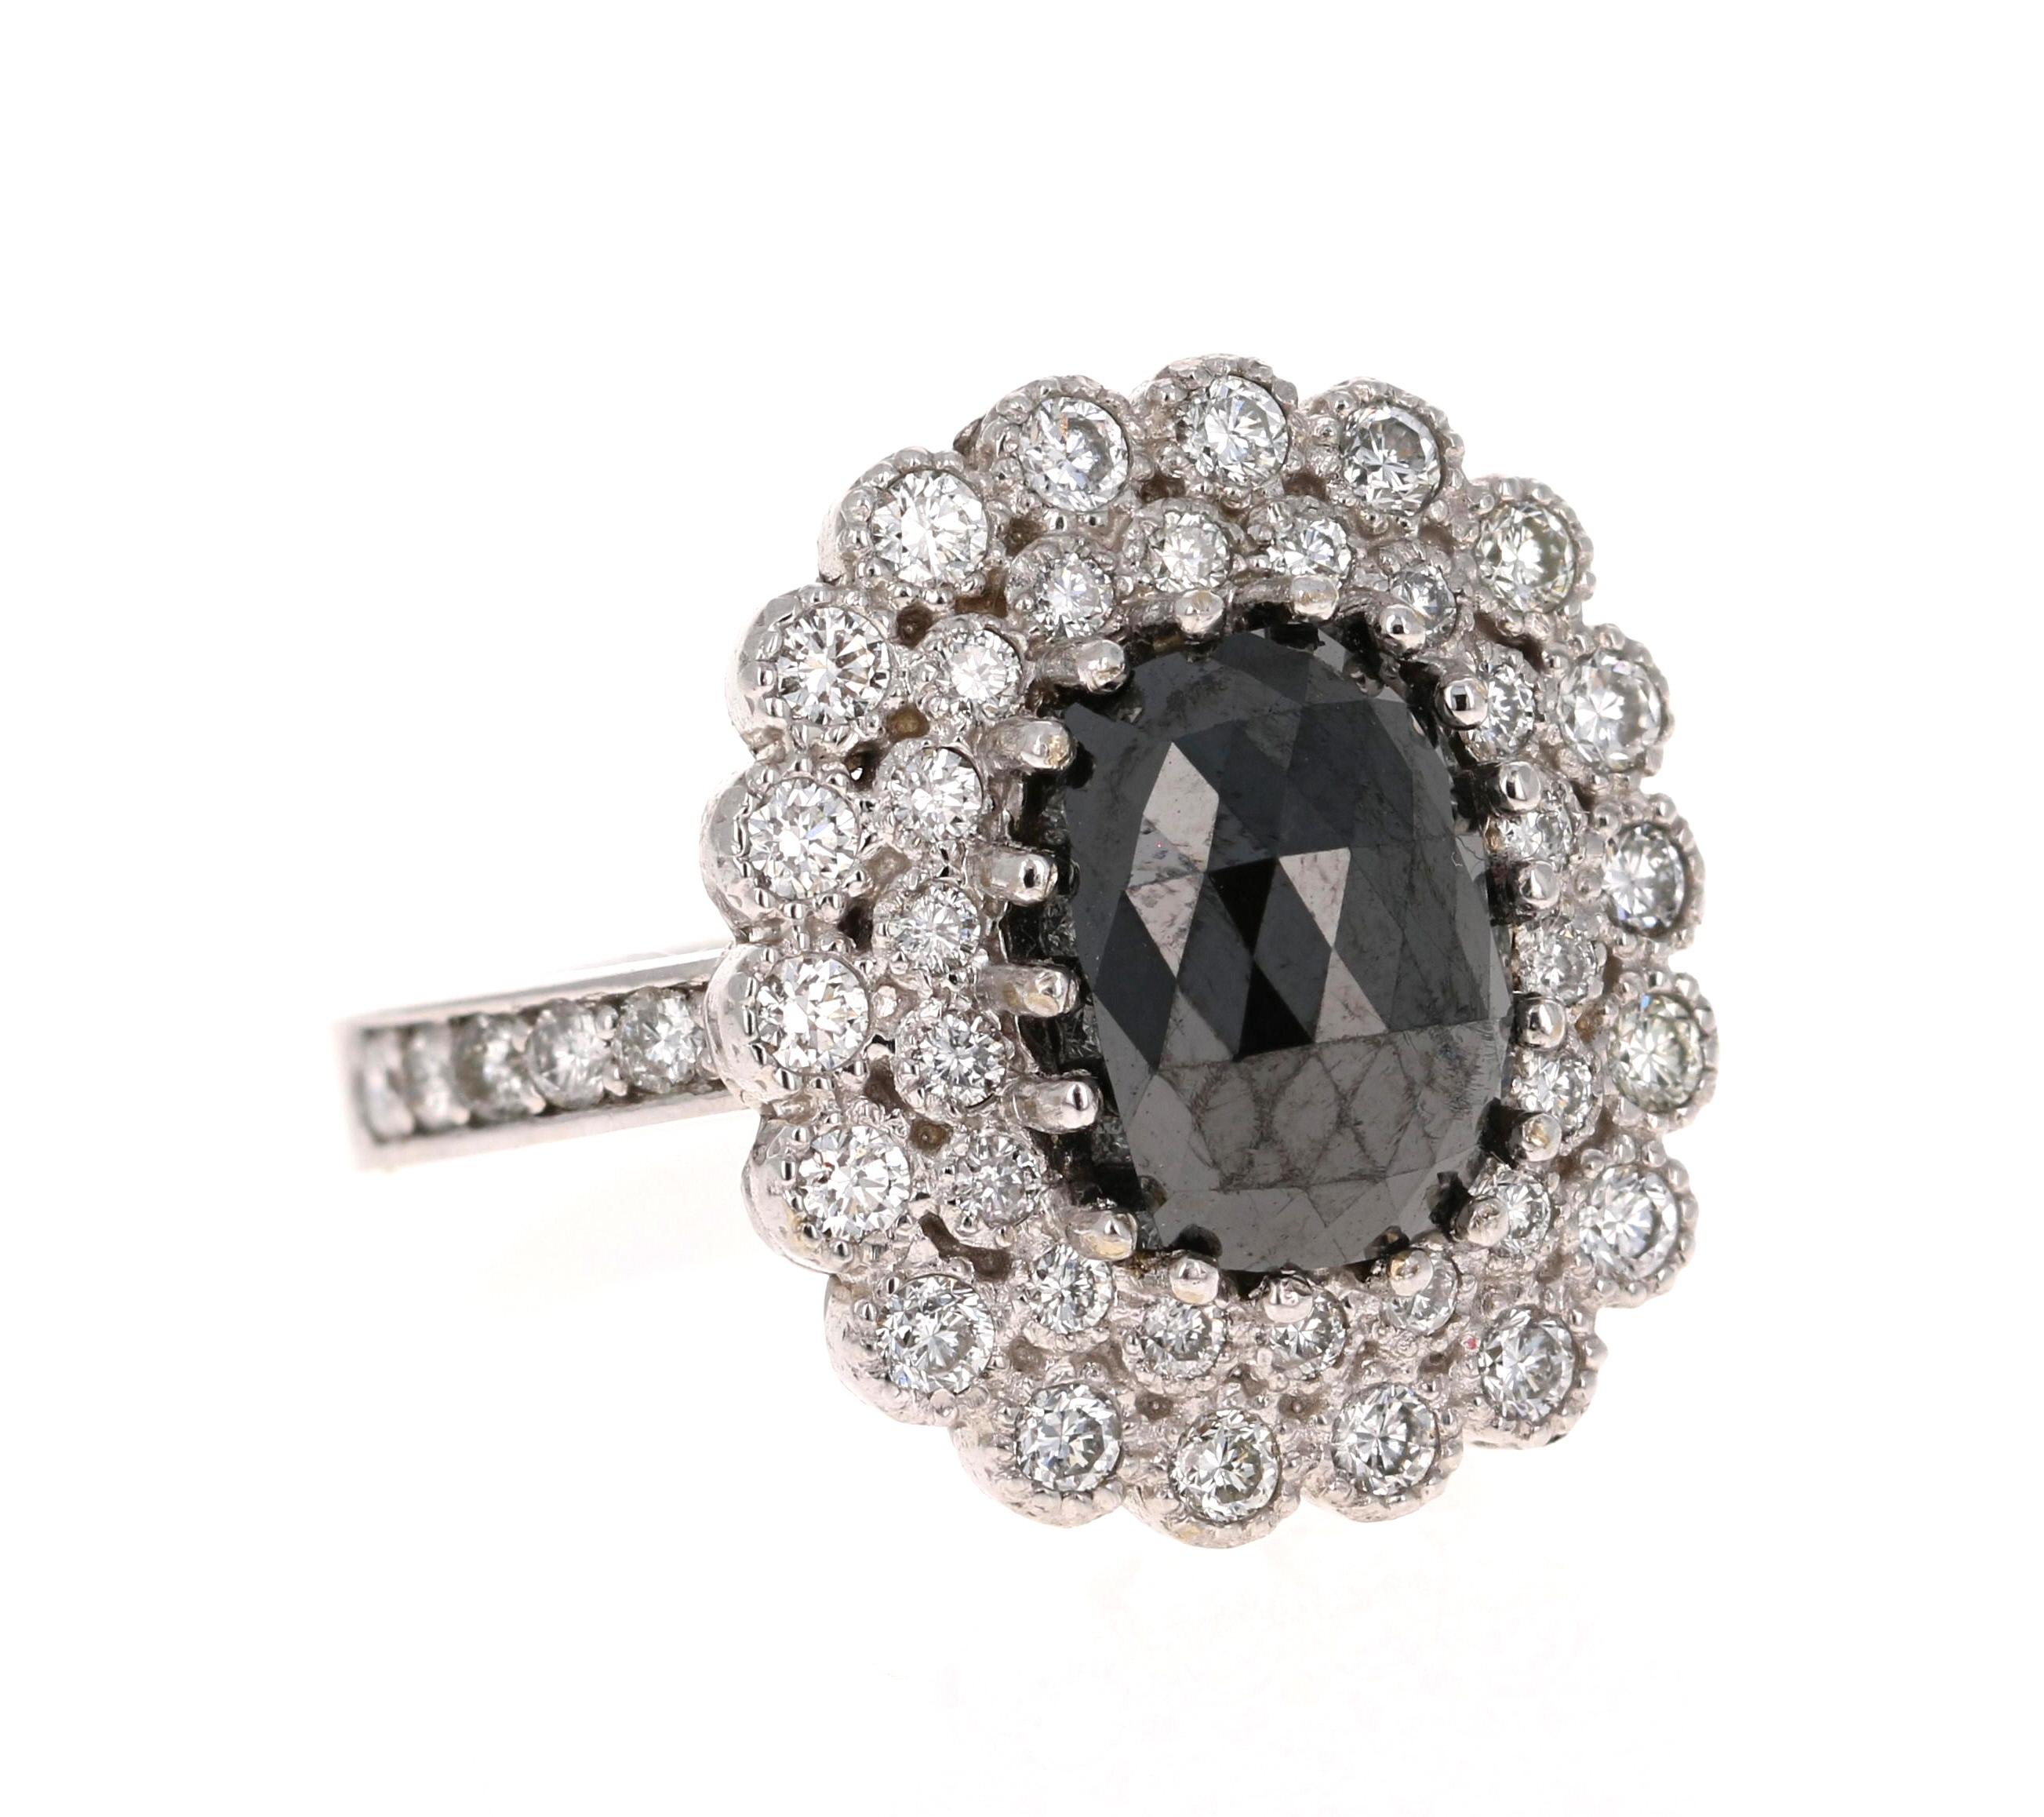 Gorgeous Black Diamond ring that can transform into an Engagement ring.  

There is a 3.34 Carat Oval Cut Black Diamond in the center on the ring which is surrounded by a bright and sparkling cluster of 48 White Round Cut Diamonds that weigh 1.12